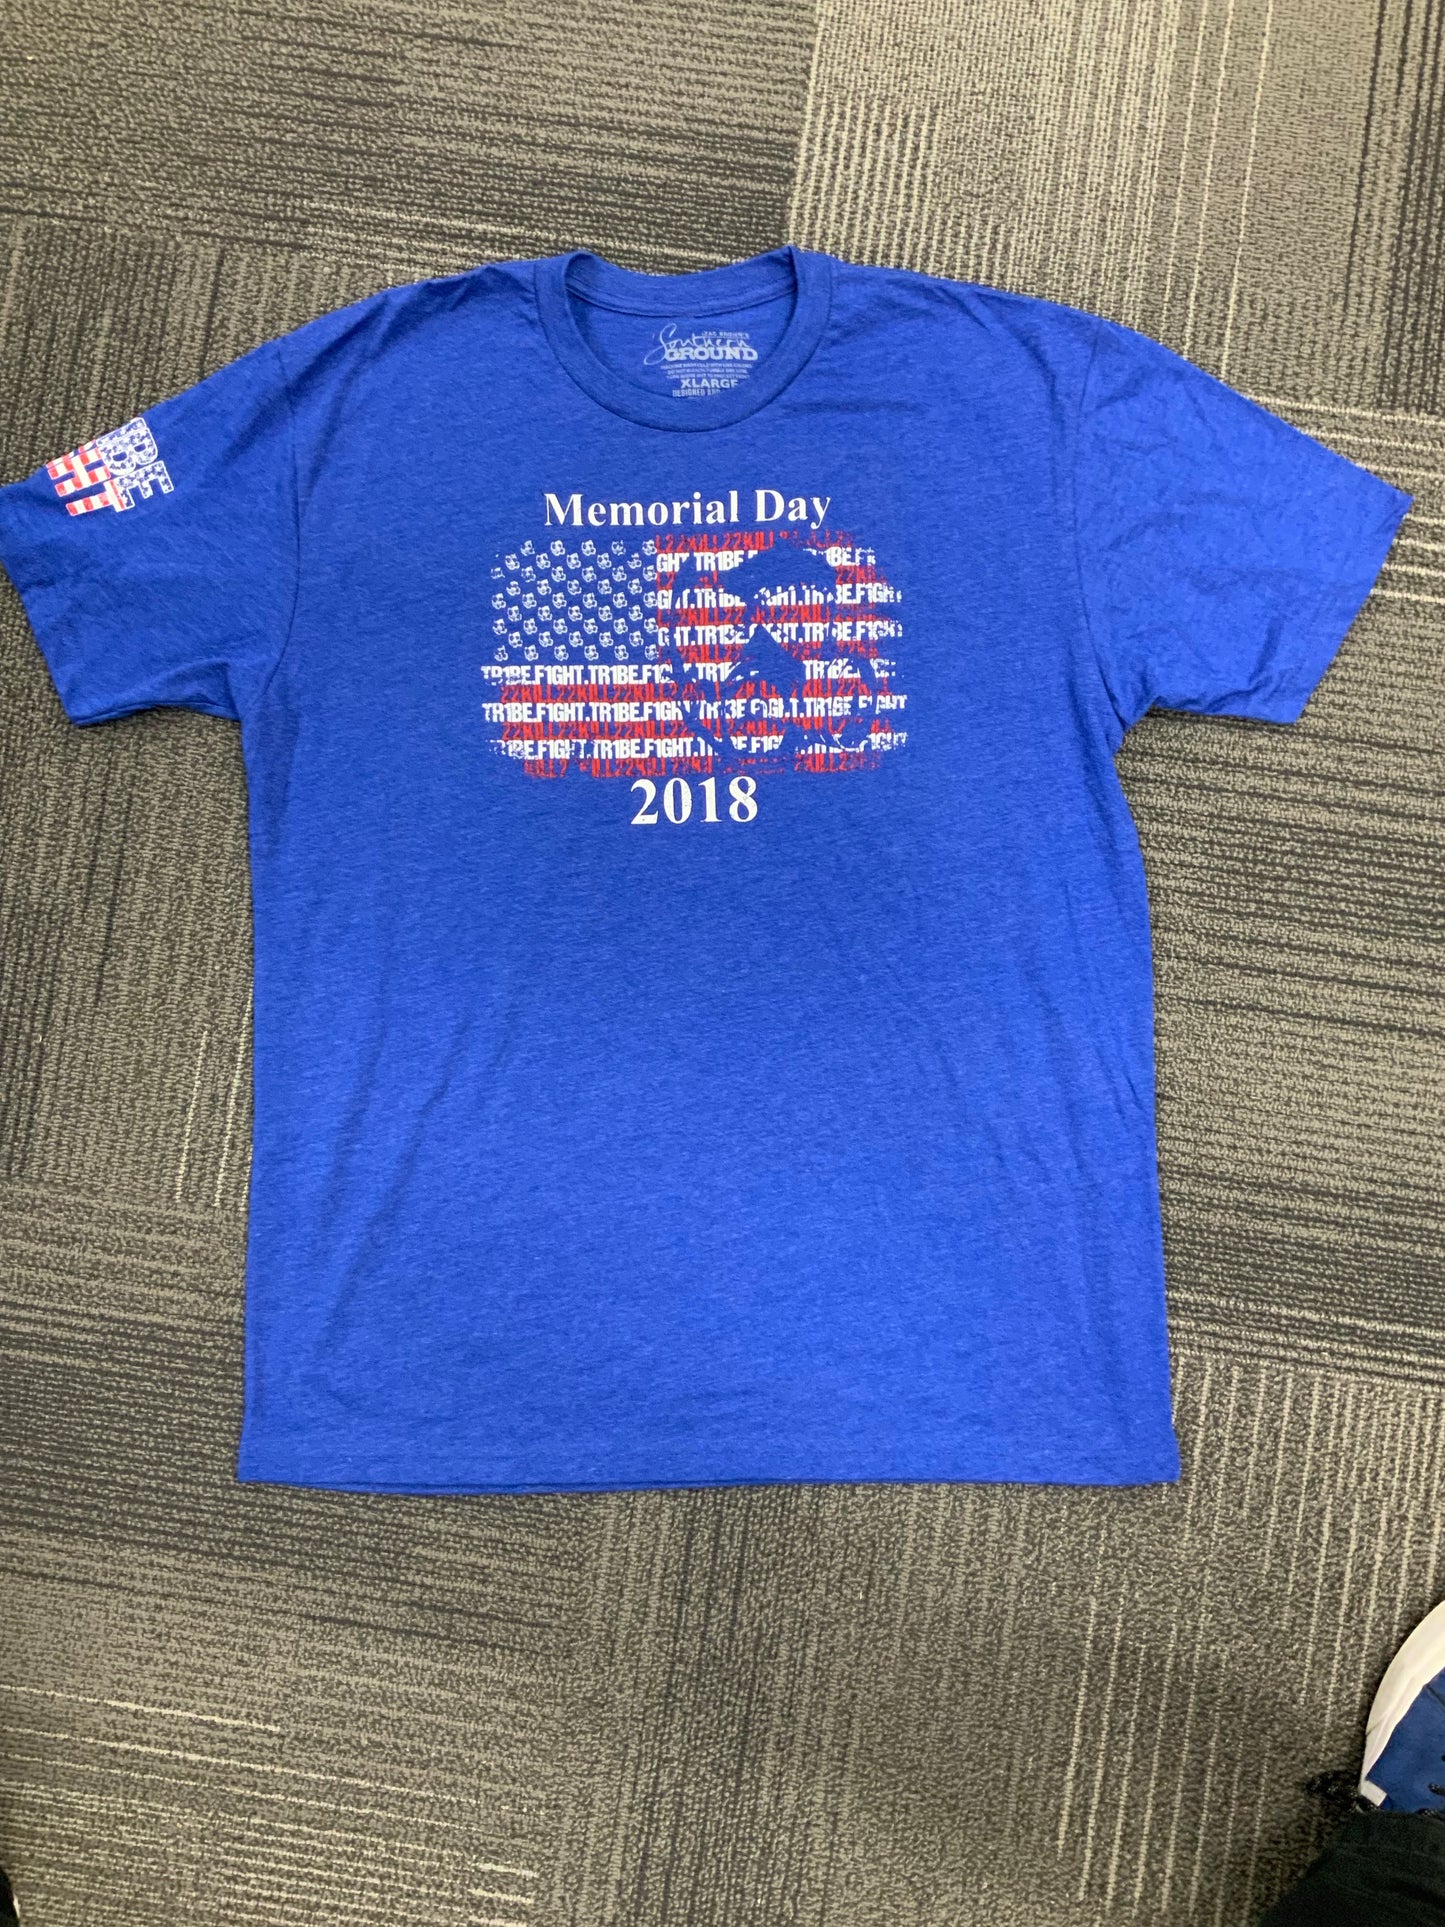 2018 Carry The Load t-shirt